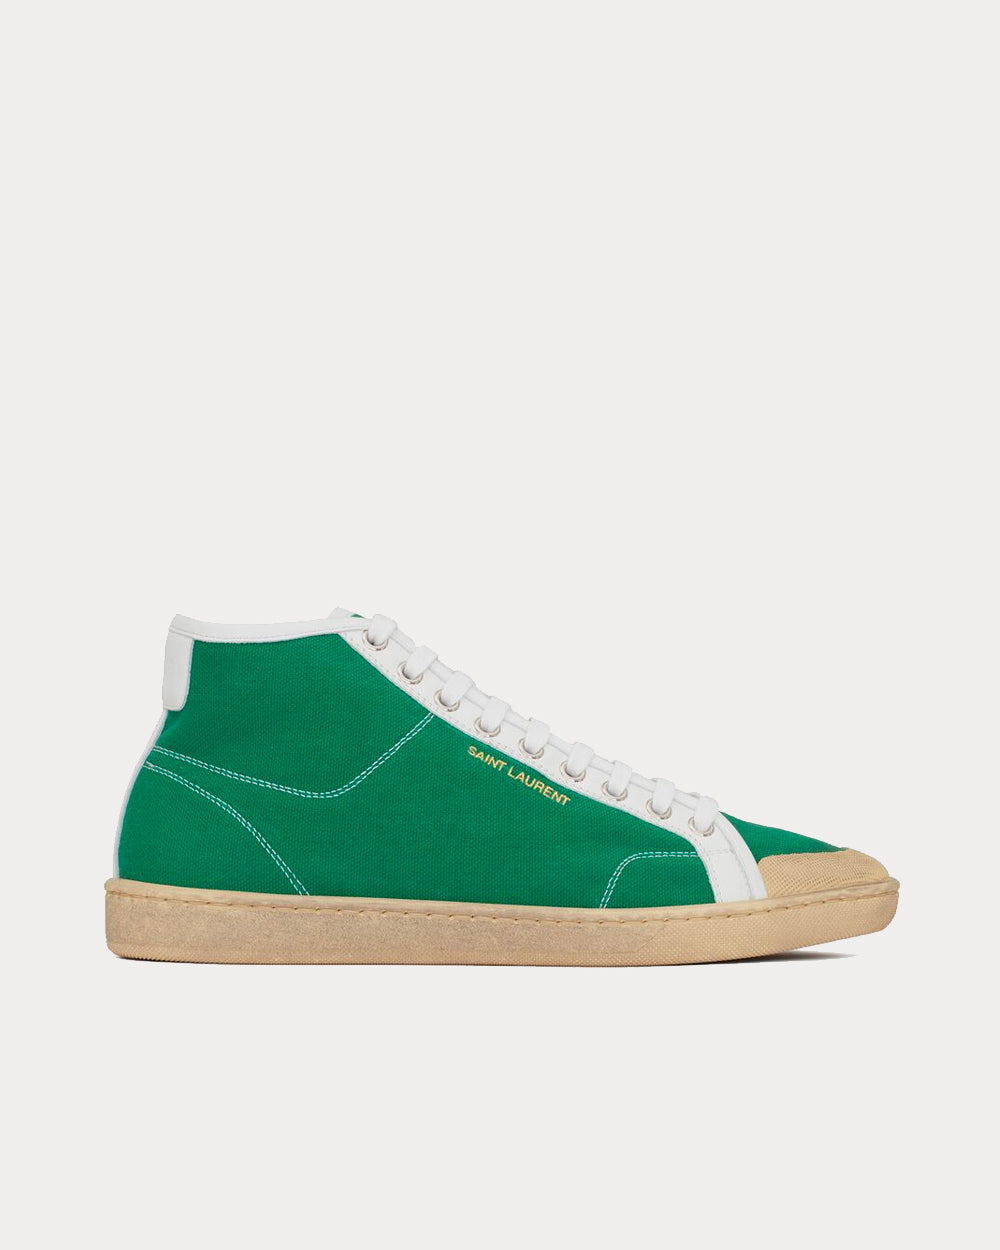 Saint Laurent - Court Classic Sl/39 Canvas & Leather Green Mid Top Sneakers